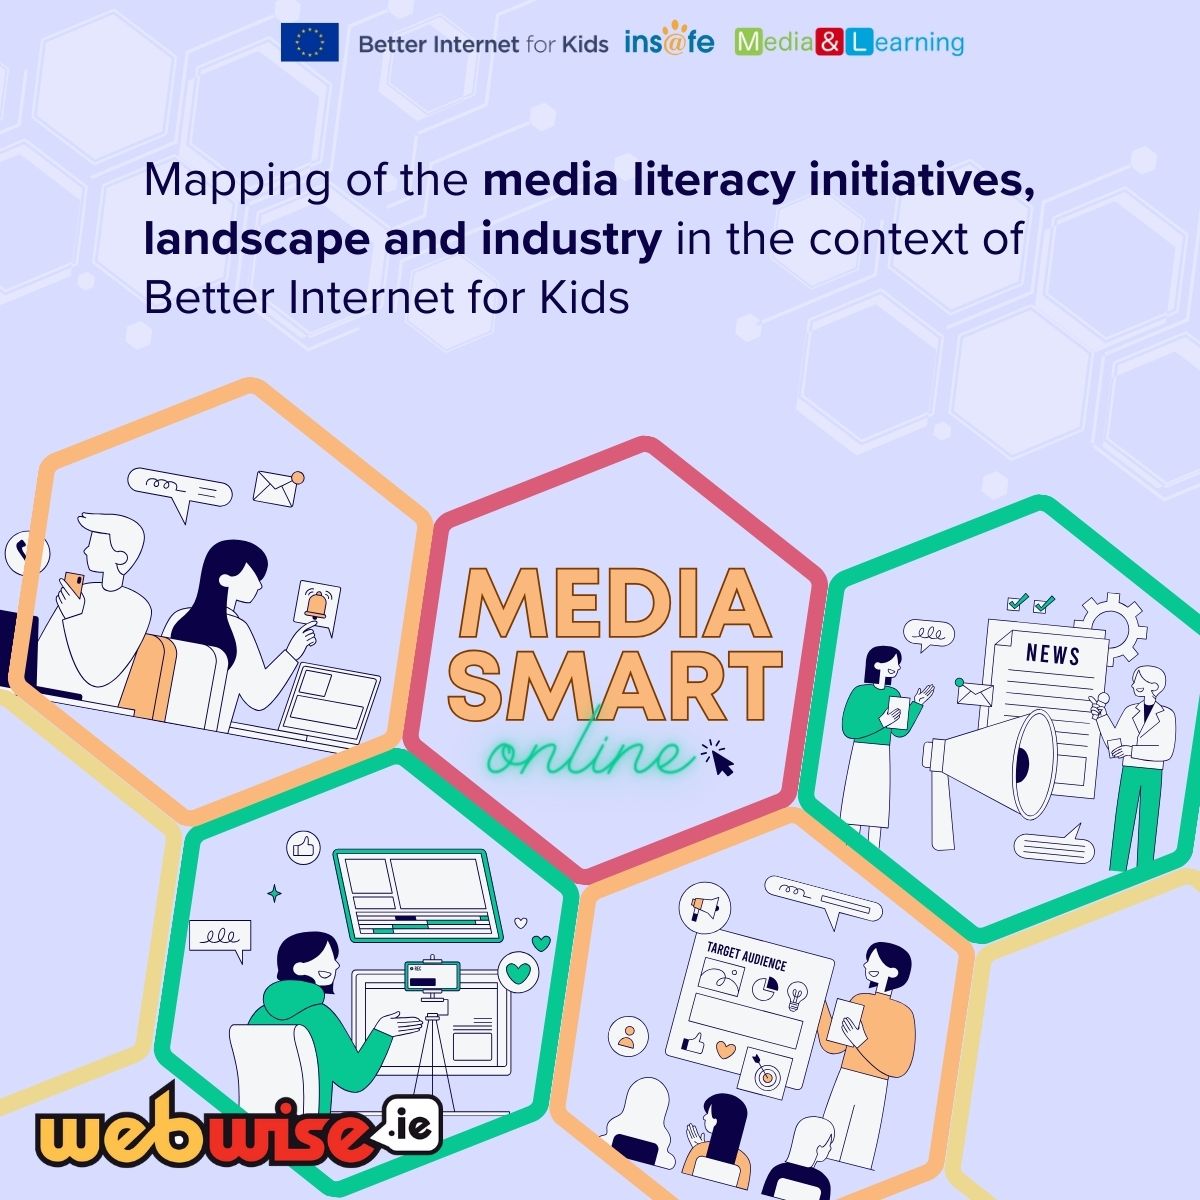 ❓How can we help people to engage confidently and safely with #AI and other technologies?

#MediaSmartOnline is bringing you a series of #MediaLiteracy initiatives/actions for this purpose!

Explore them here: bit.ly/3UYQoc1

@Insafenetwork @MediaLearning